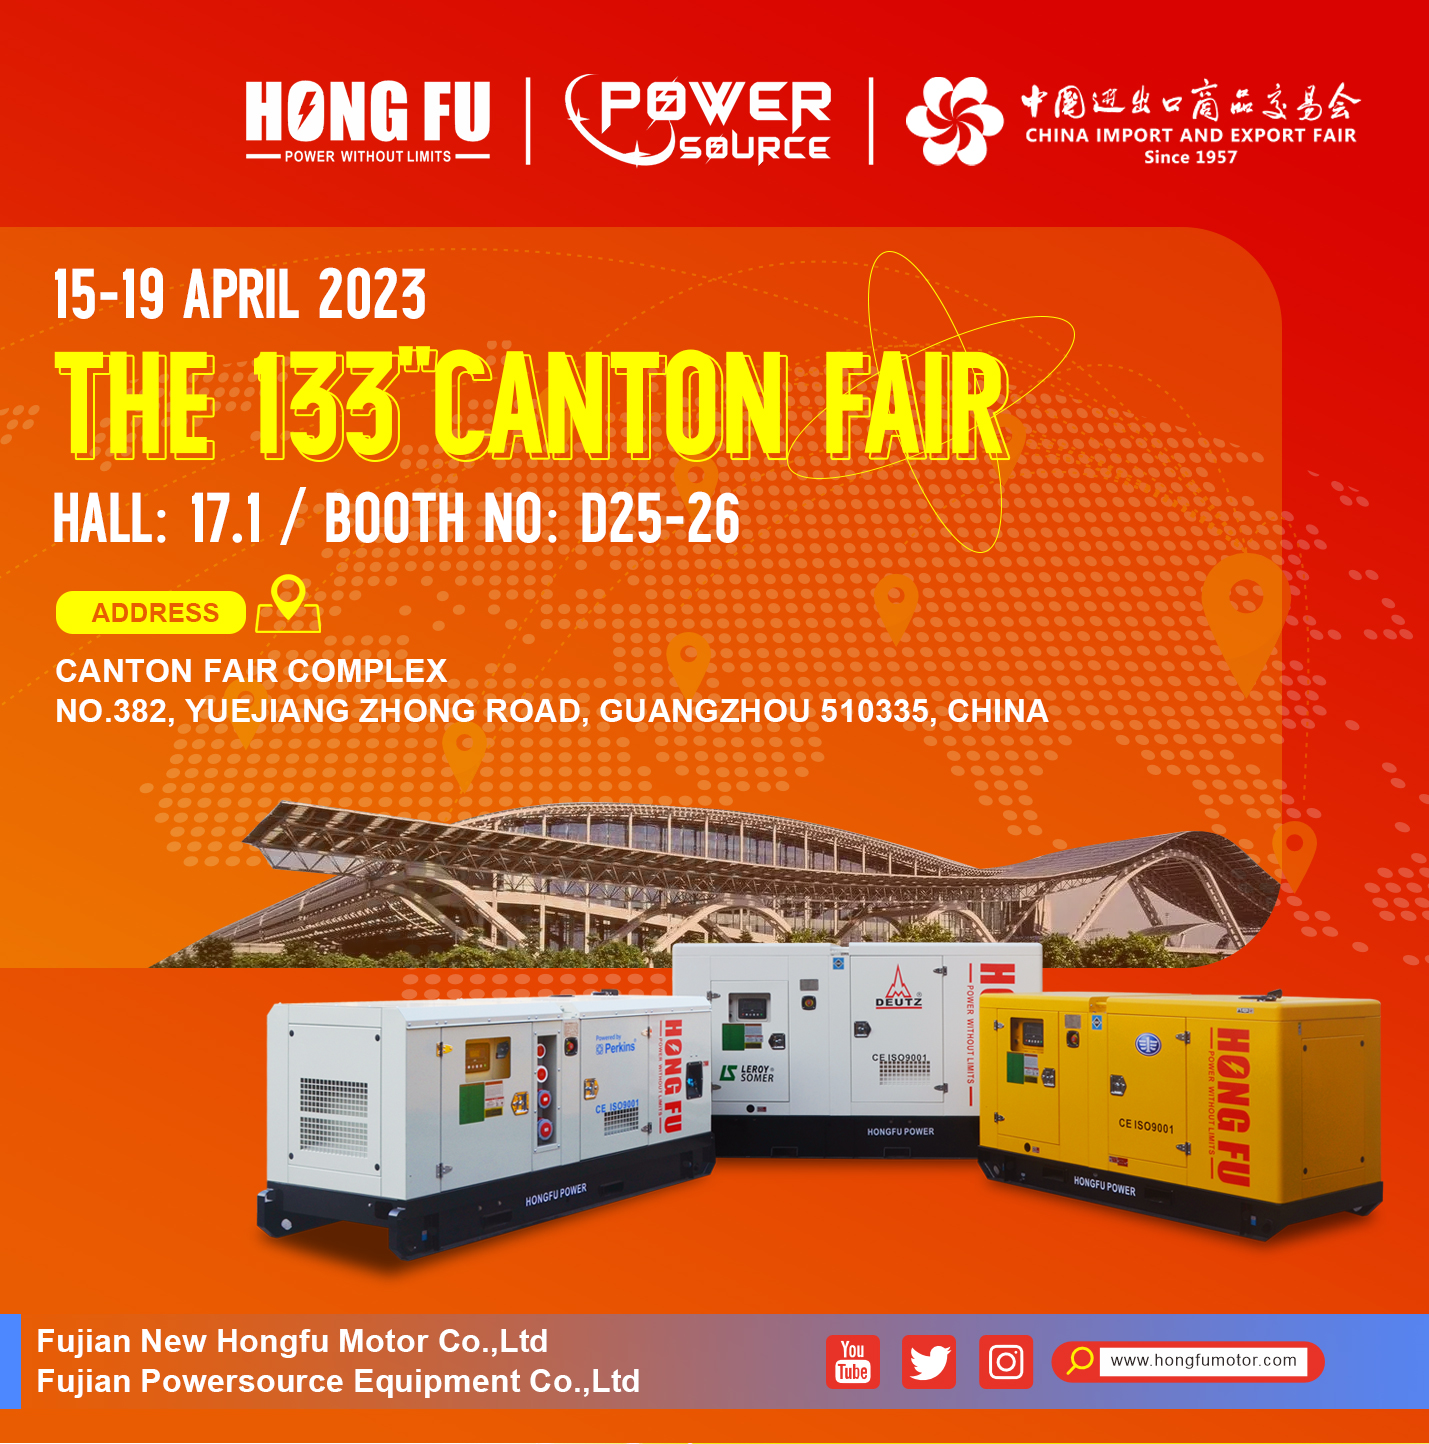 HONGFU POWER invites you to our the 133rd Canton Fair